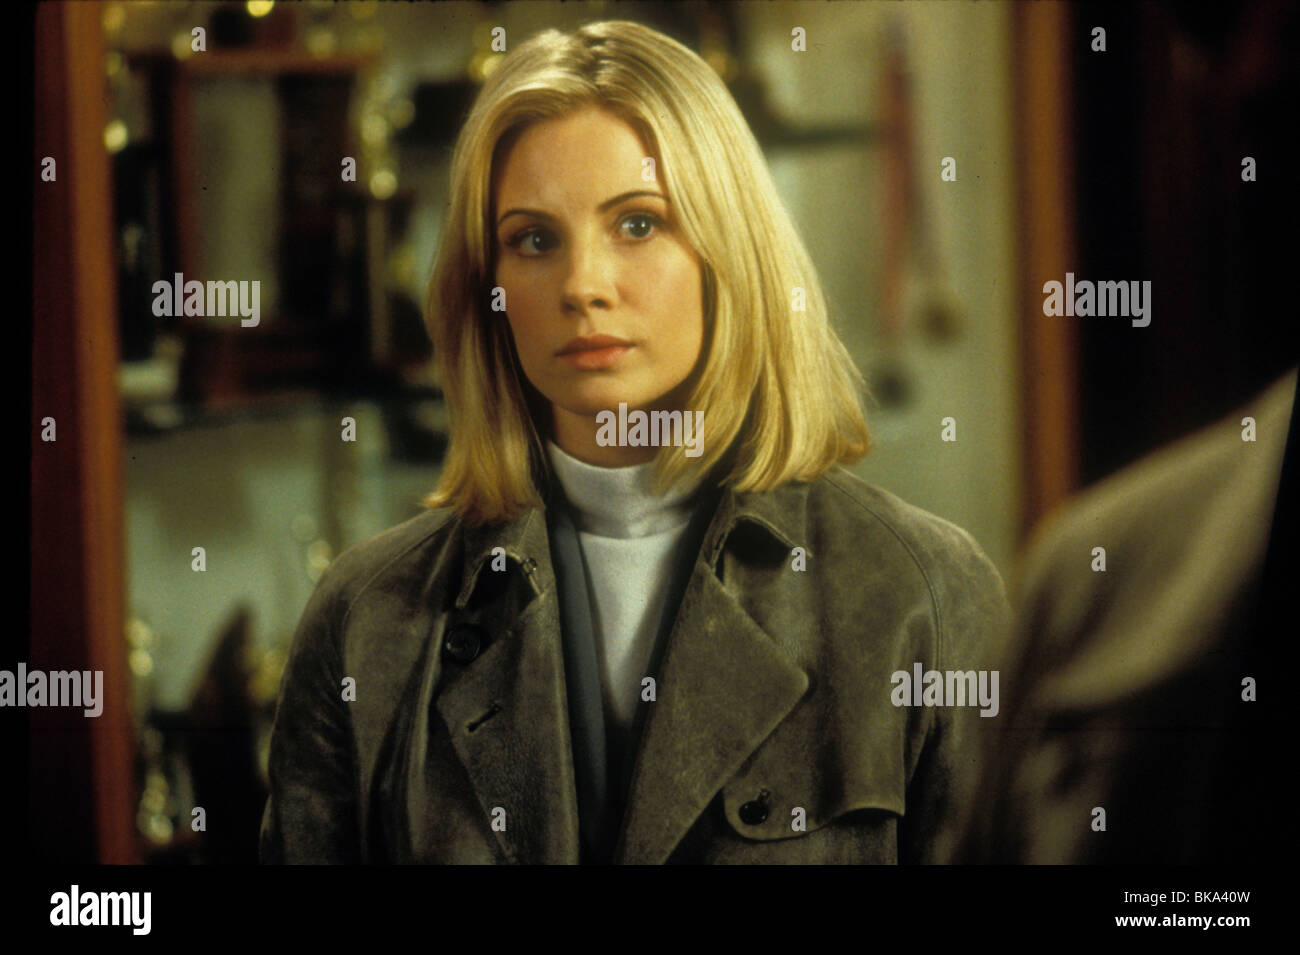 ALONG CAME A SPIDER (2001) MONICA POTTER ALCS 005 Stock Photo